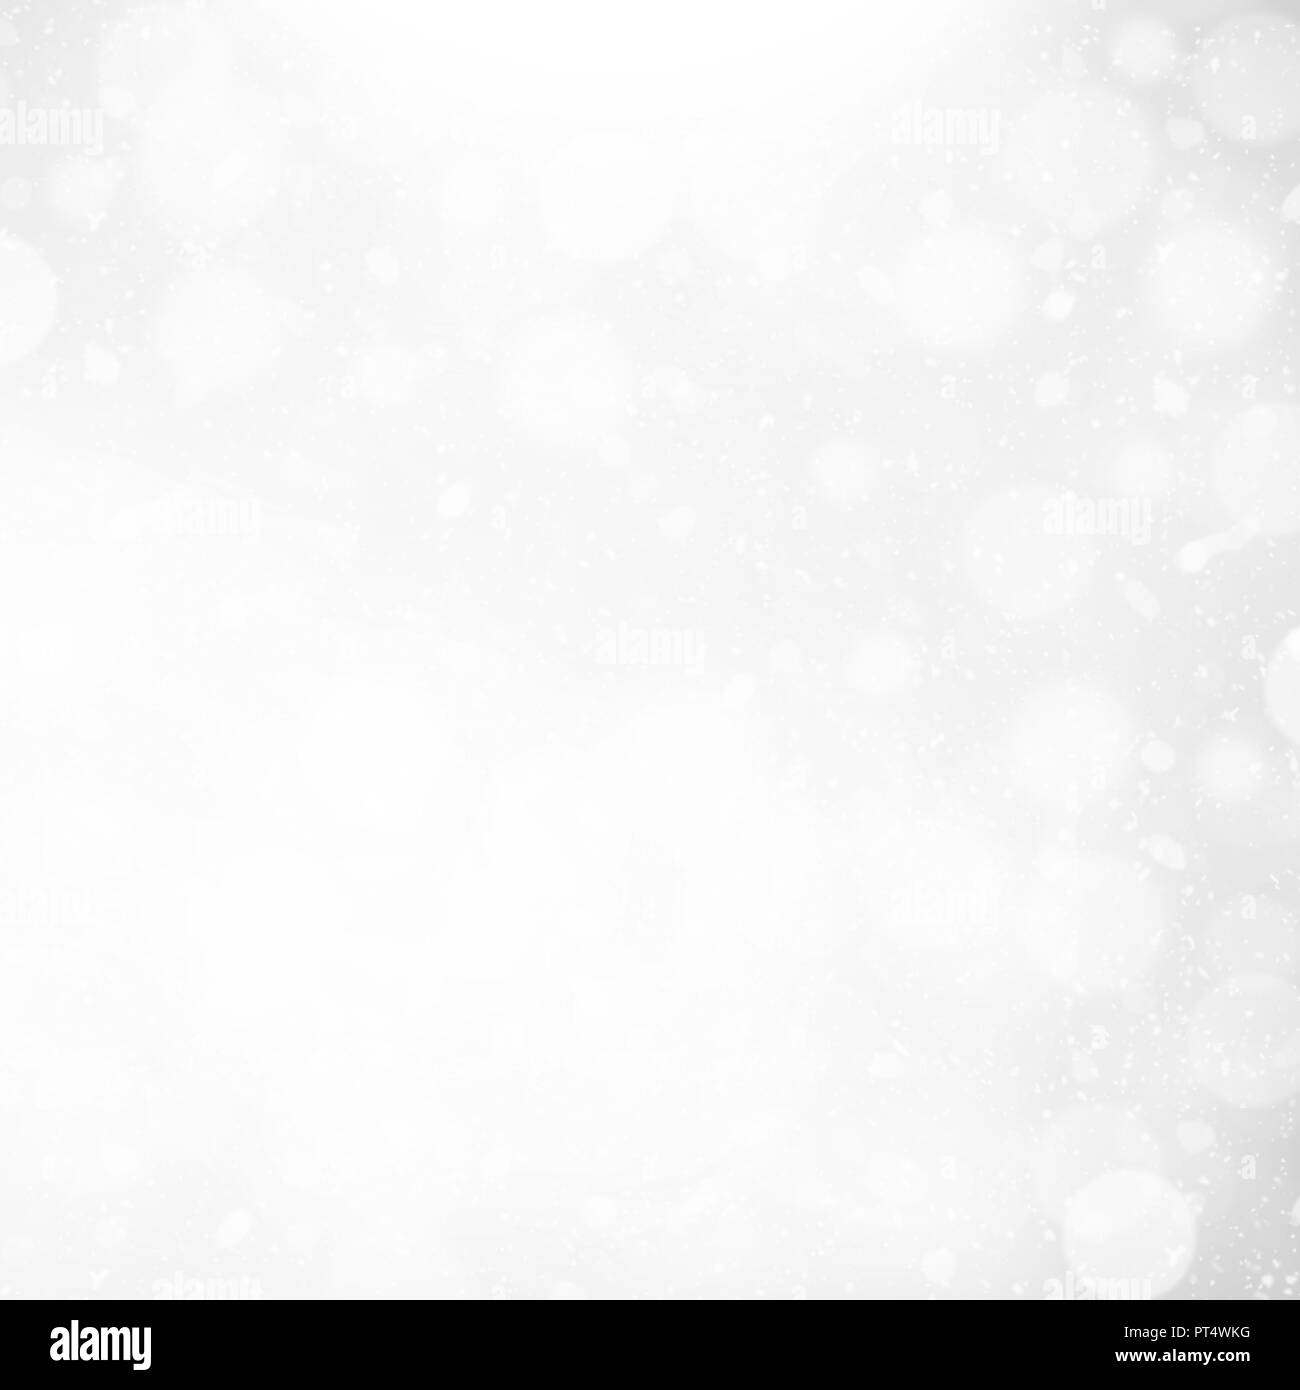 Abstract Winter Snow Background Stock Photo